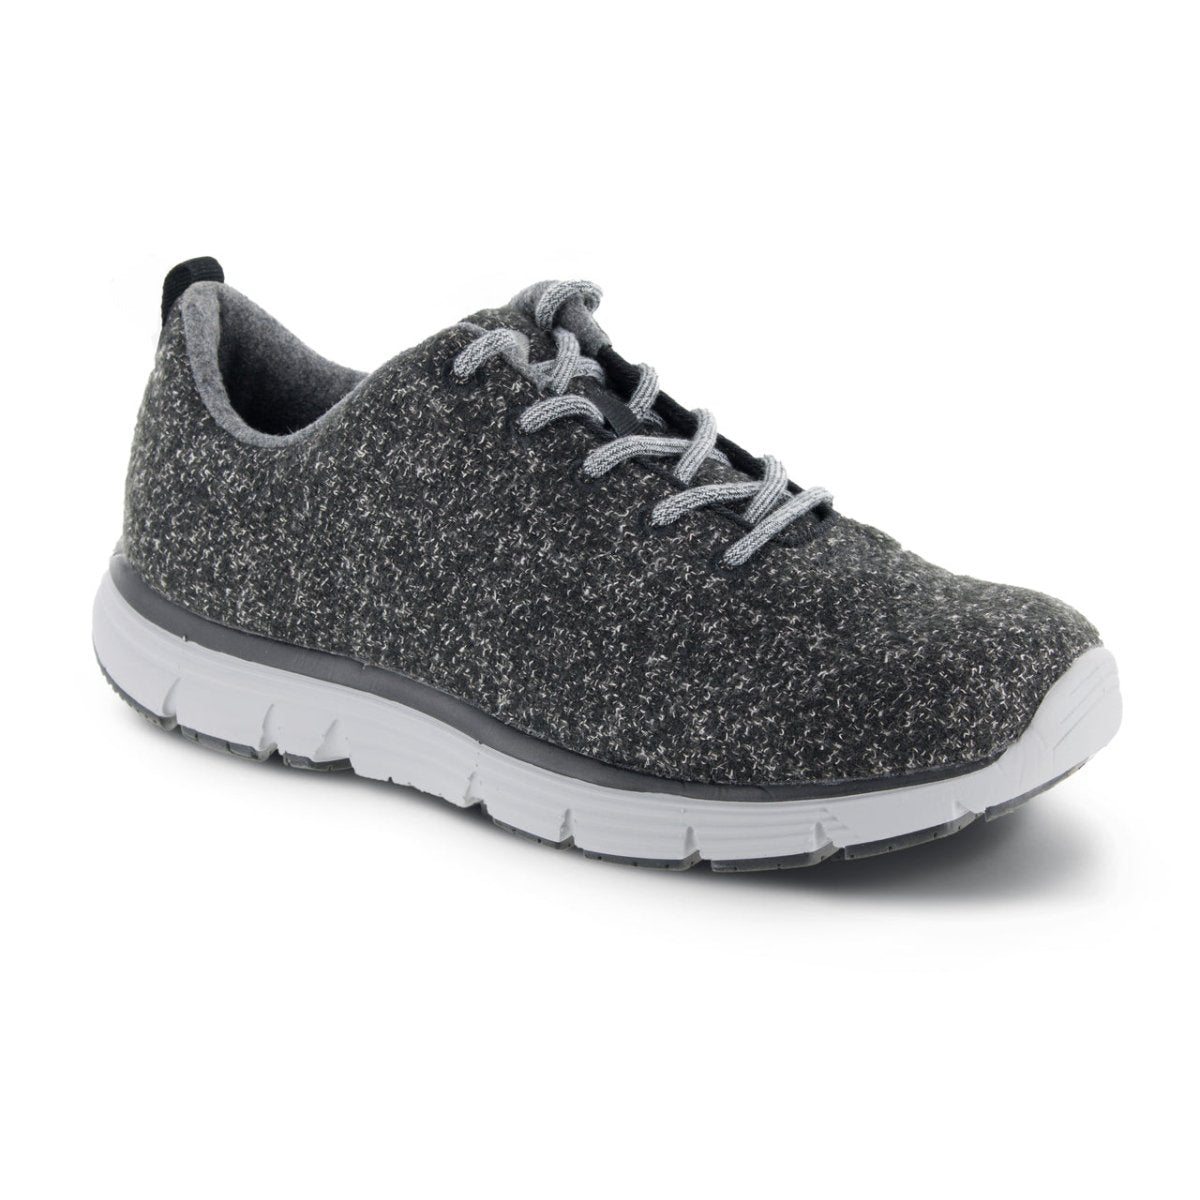 APEX A8100M NATURAL WOOL KNIT MEN'S CASUAL SHOE IN DARK GRAY - TLW Shoes